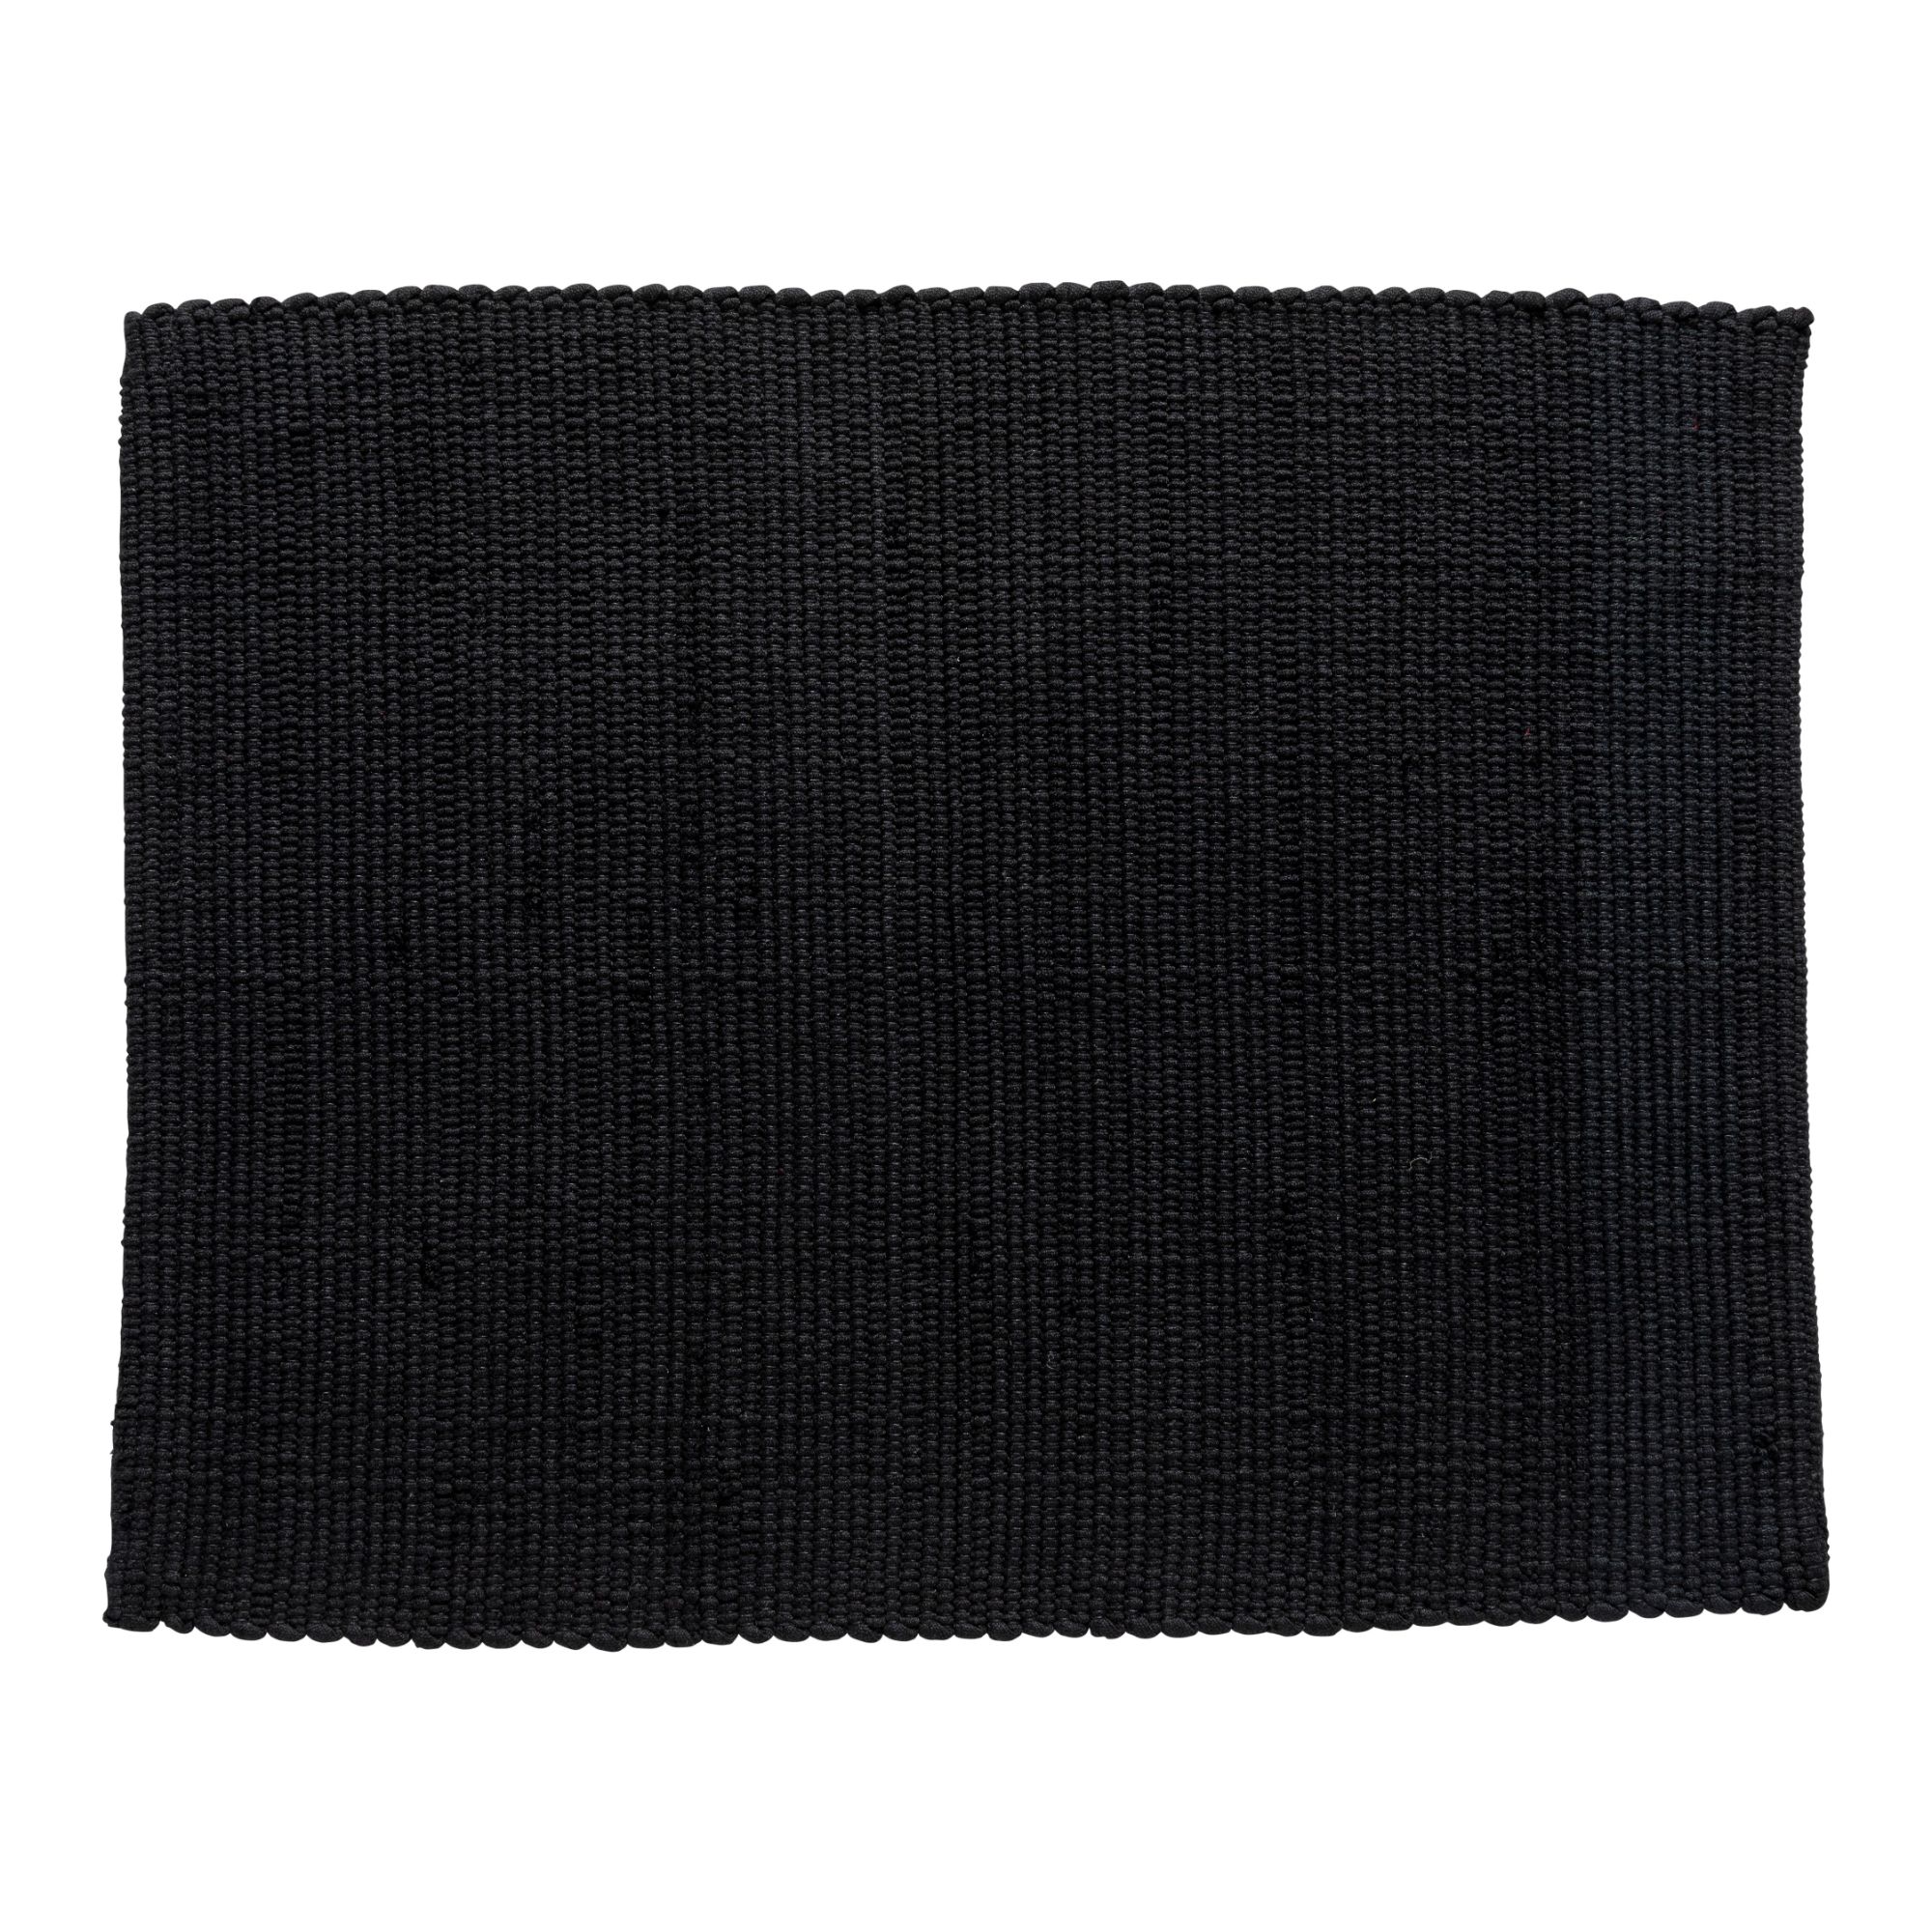 Joana Recycled Cotton Placemat Black 30cm X 40cm Gift